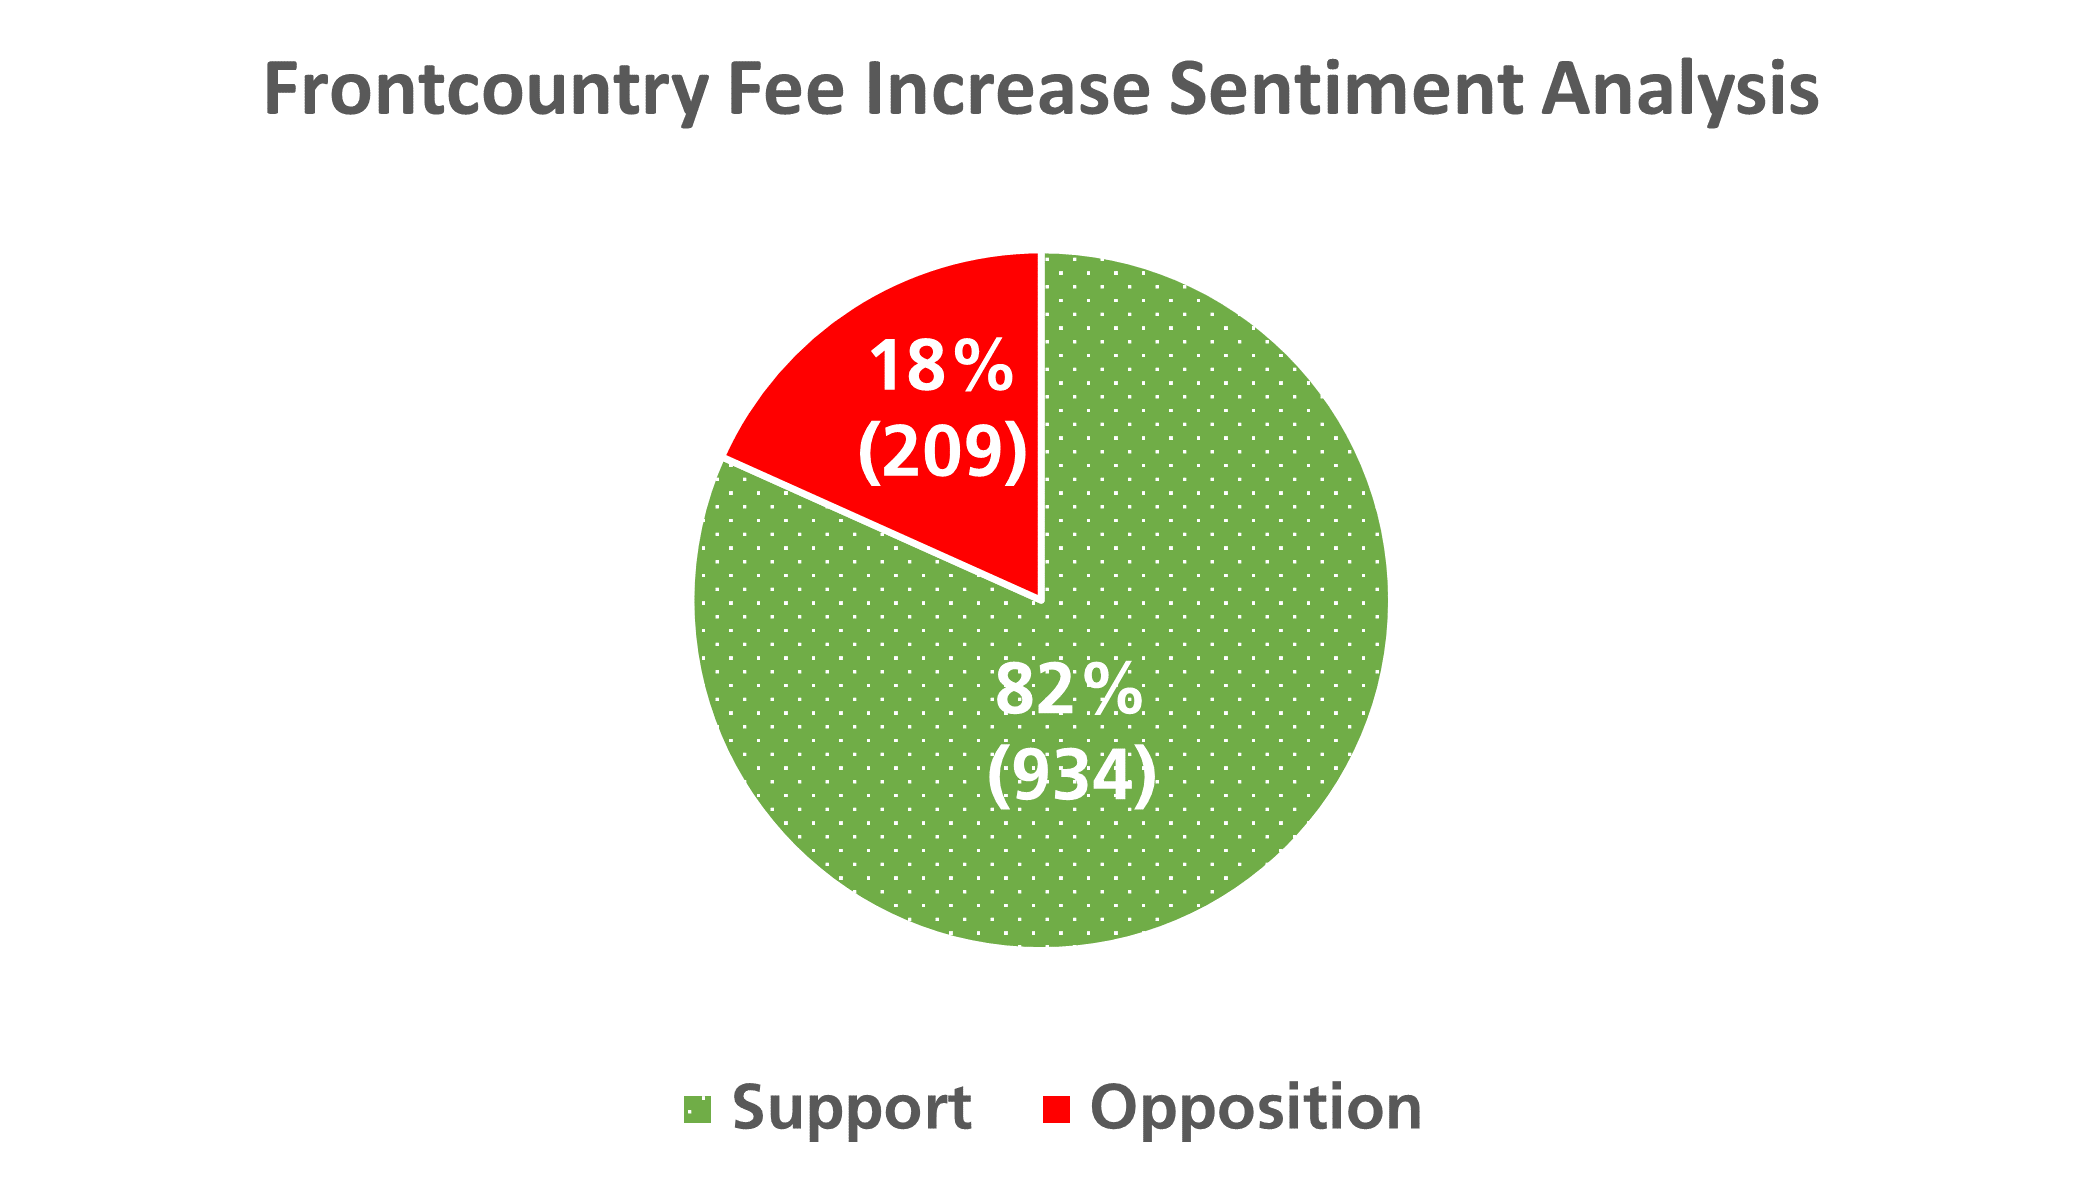 Frontcountry fee increase sentiment analysis pie chart